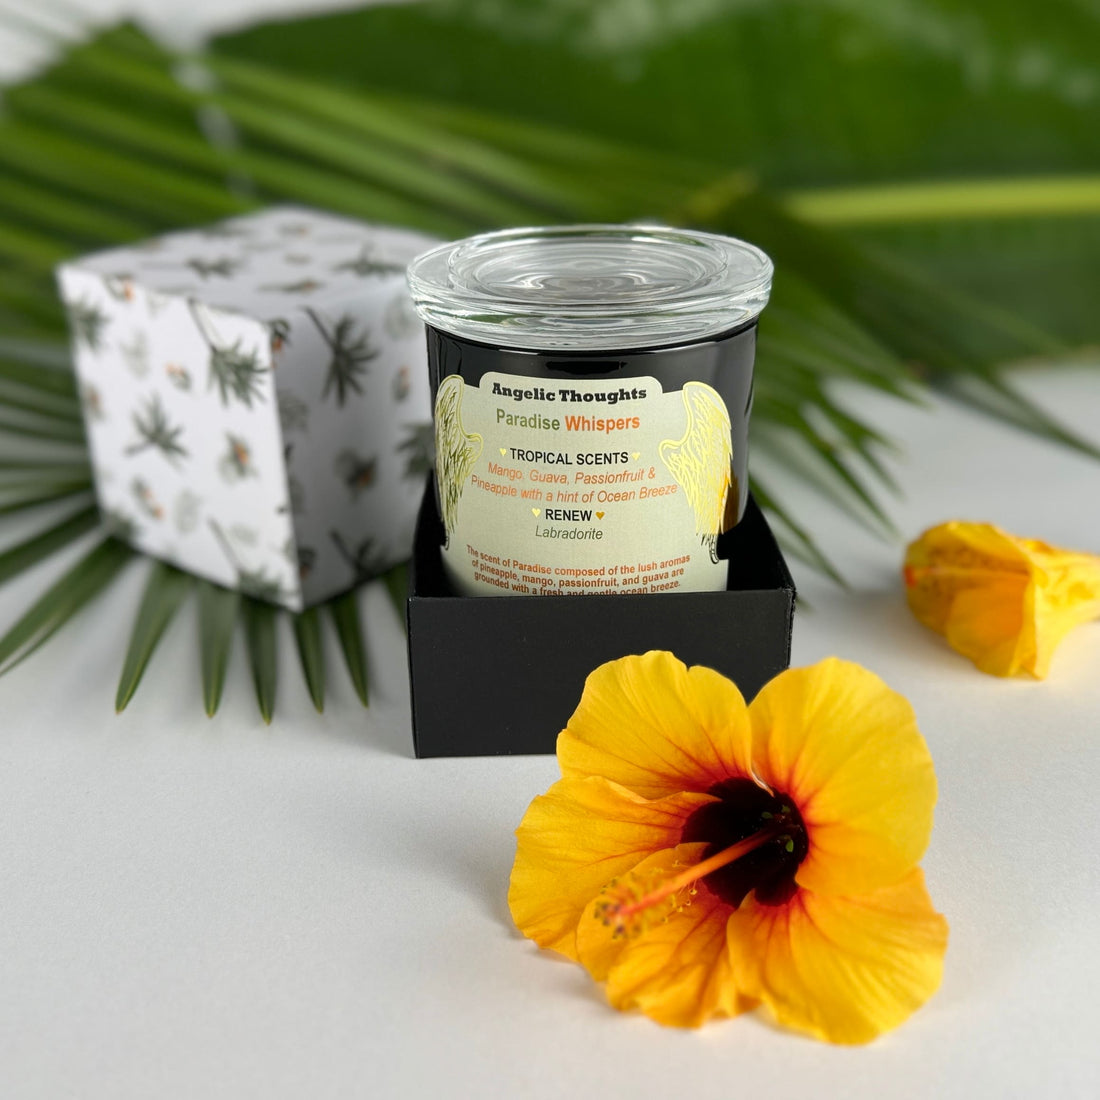 Golden orange hibiscus in foreground with Paradise Whispers candle in black base box, sitting in front of product box featuring palm trees and bird of paradise flowers